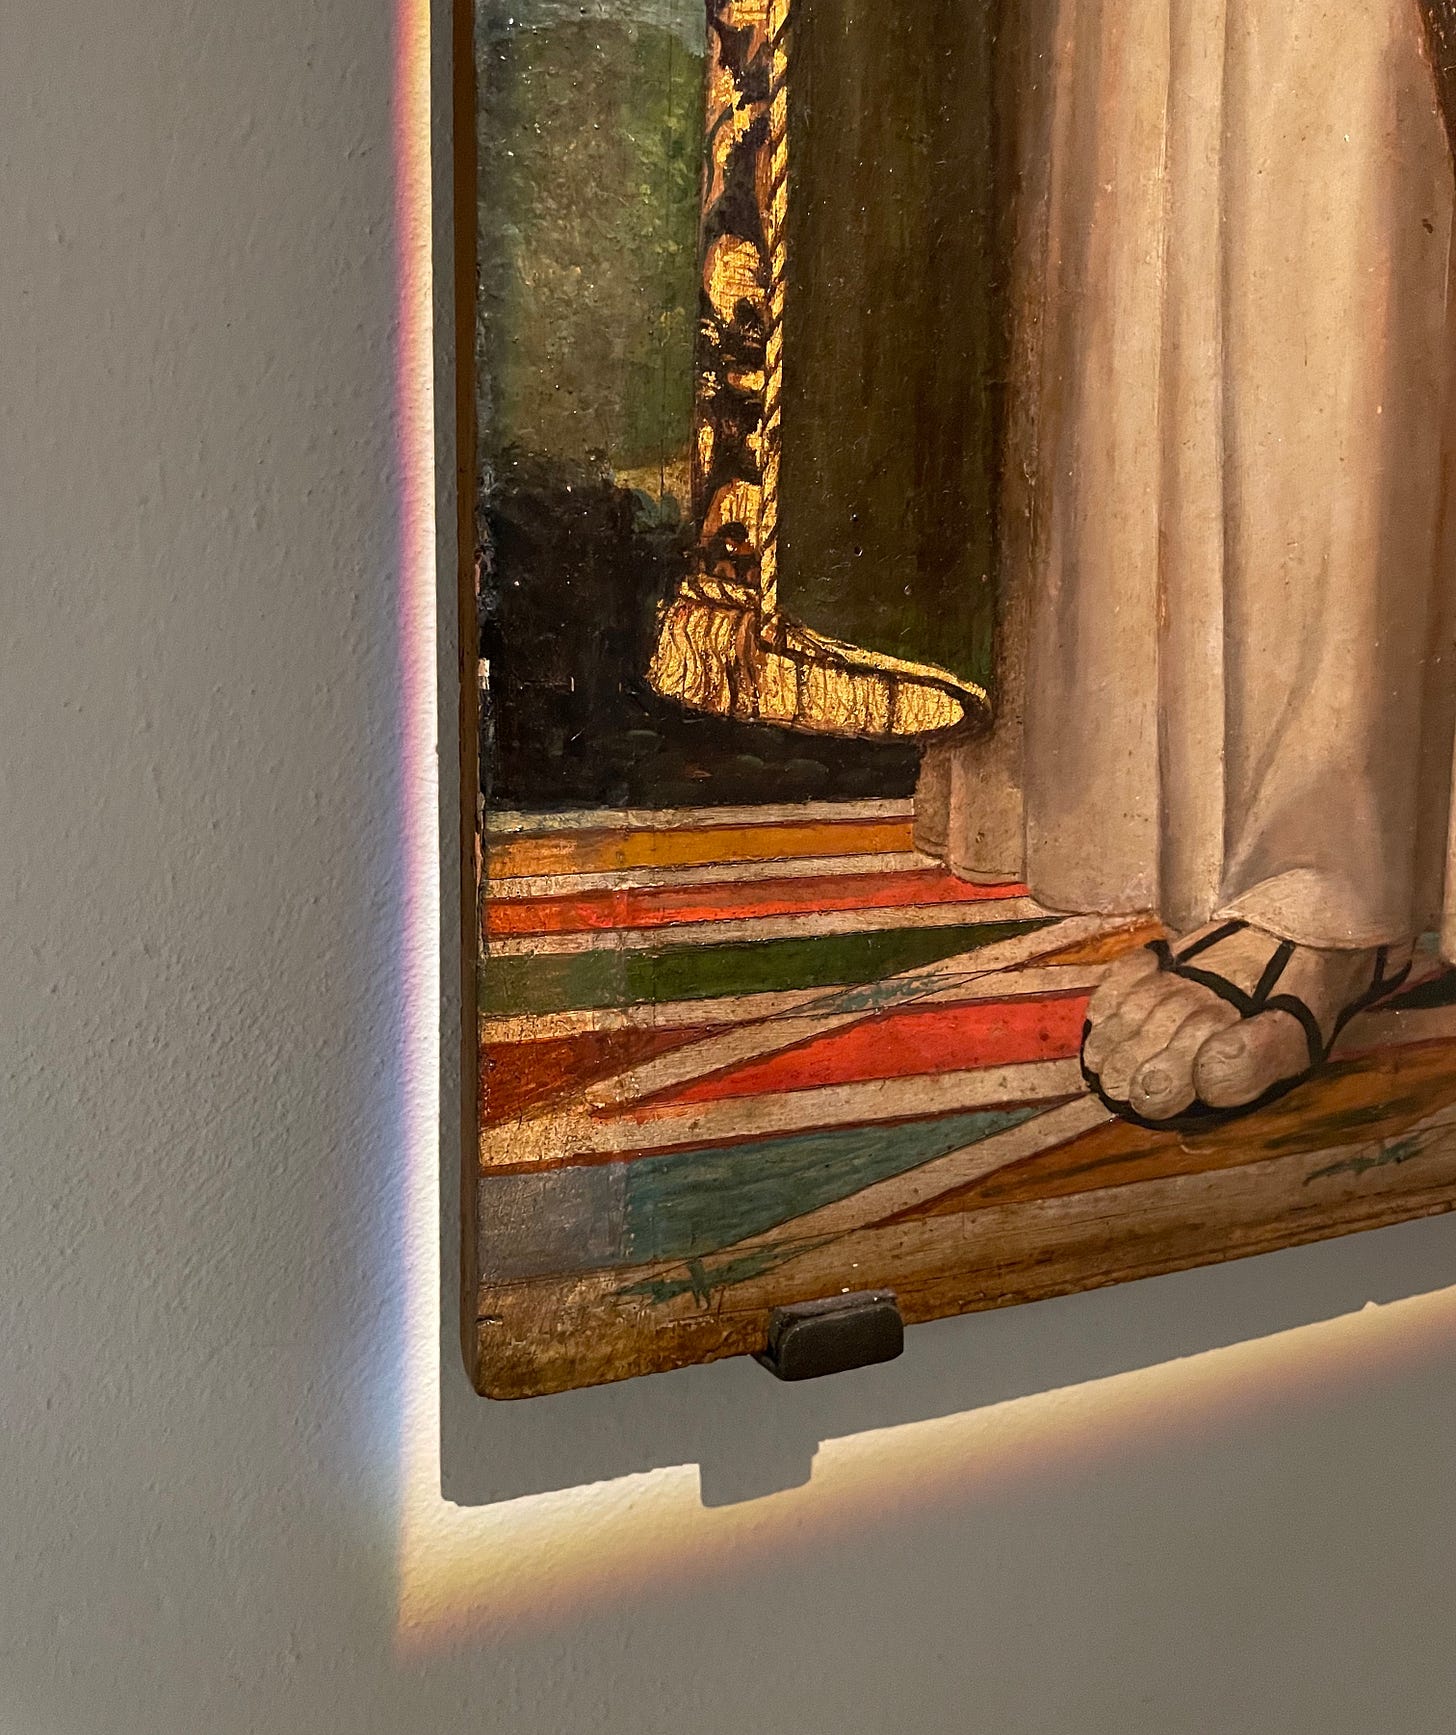 A painting of a foot on a wall with a rainbow reflection on the wall behind it